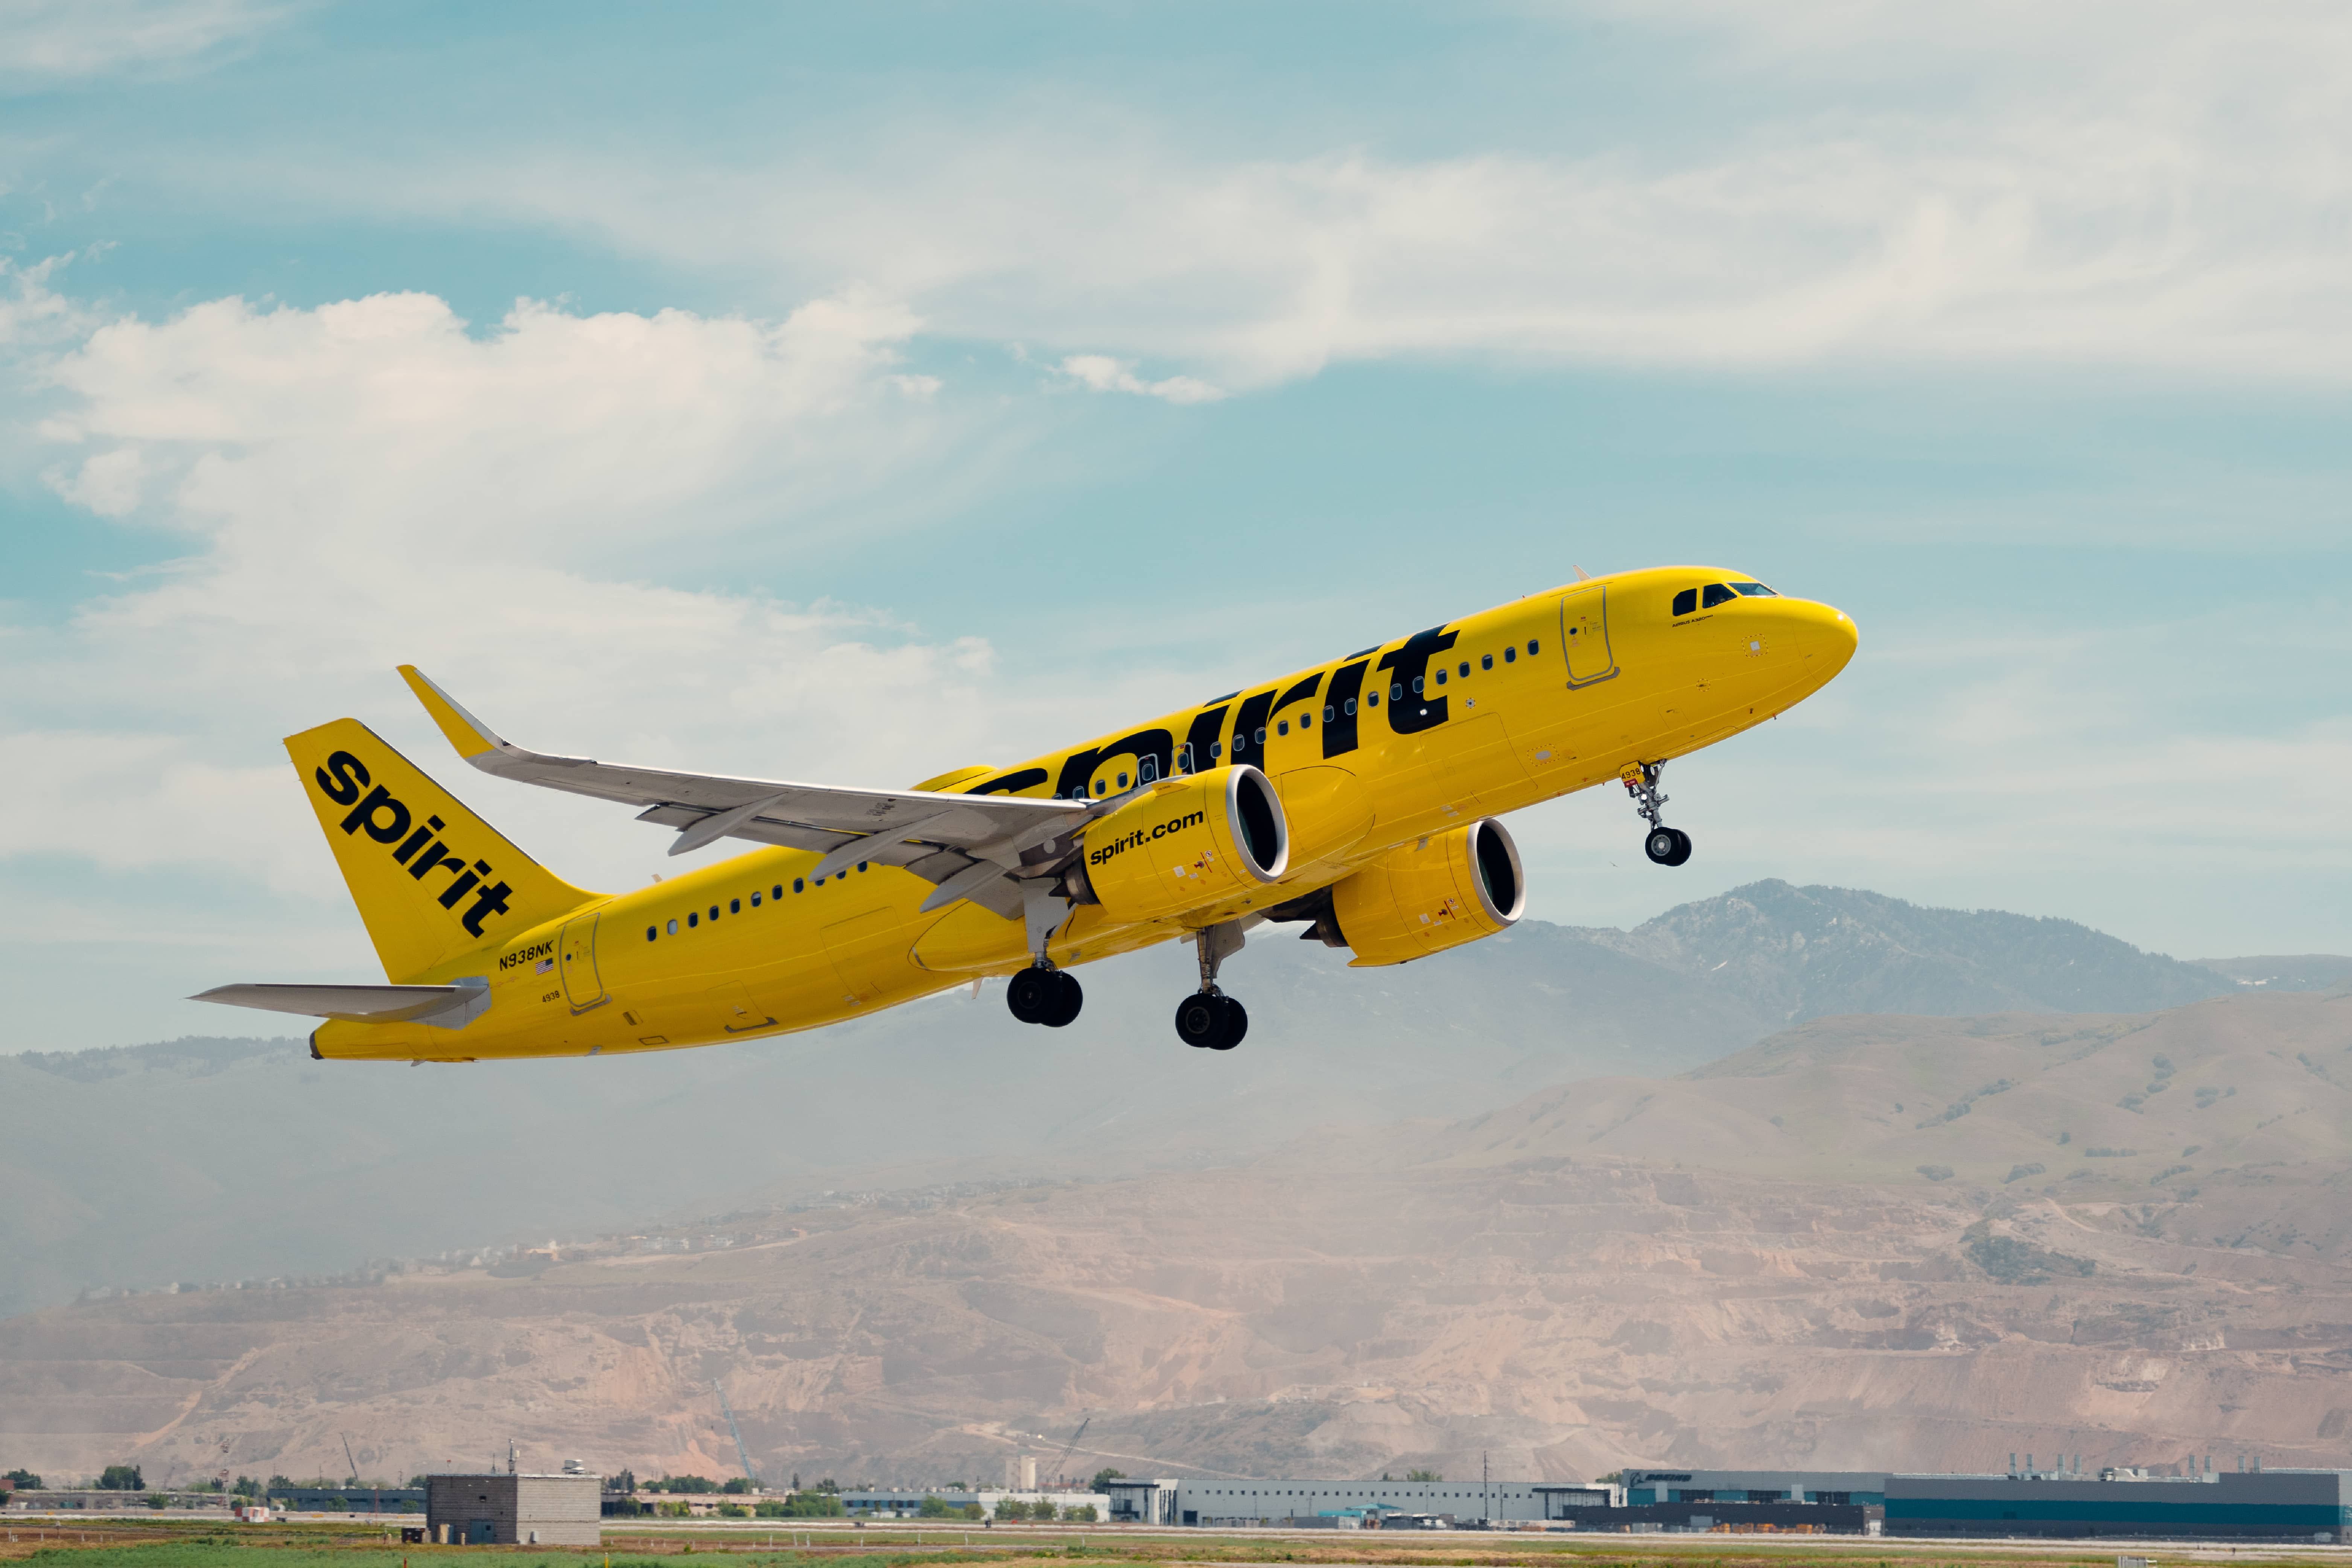 Spirit Airlines Airbus A320 taking off. 